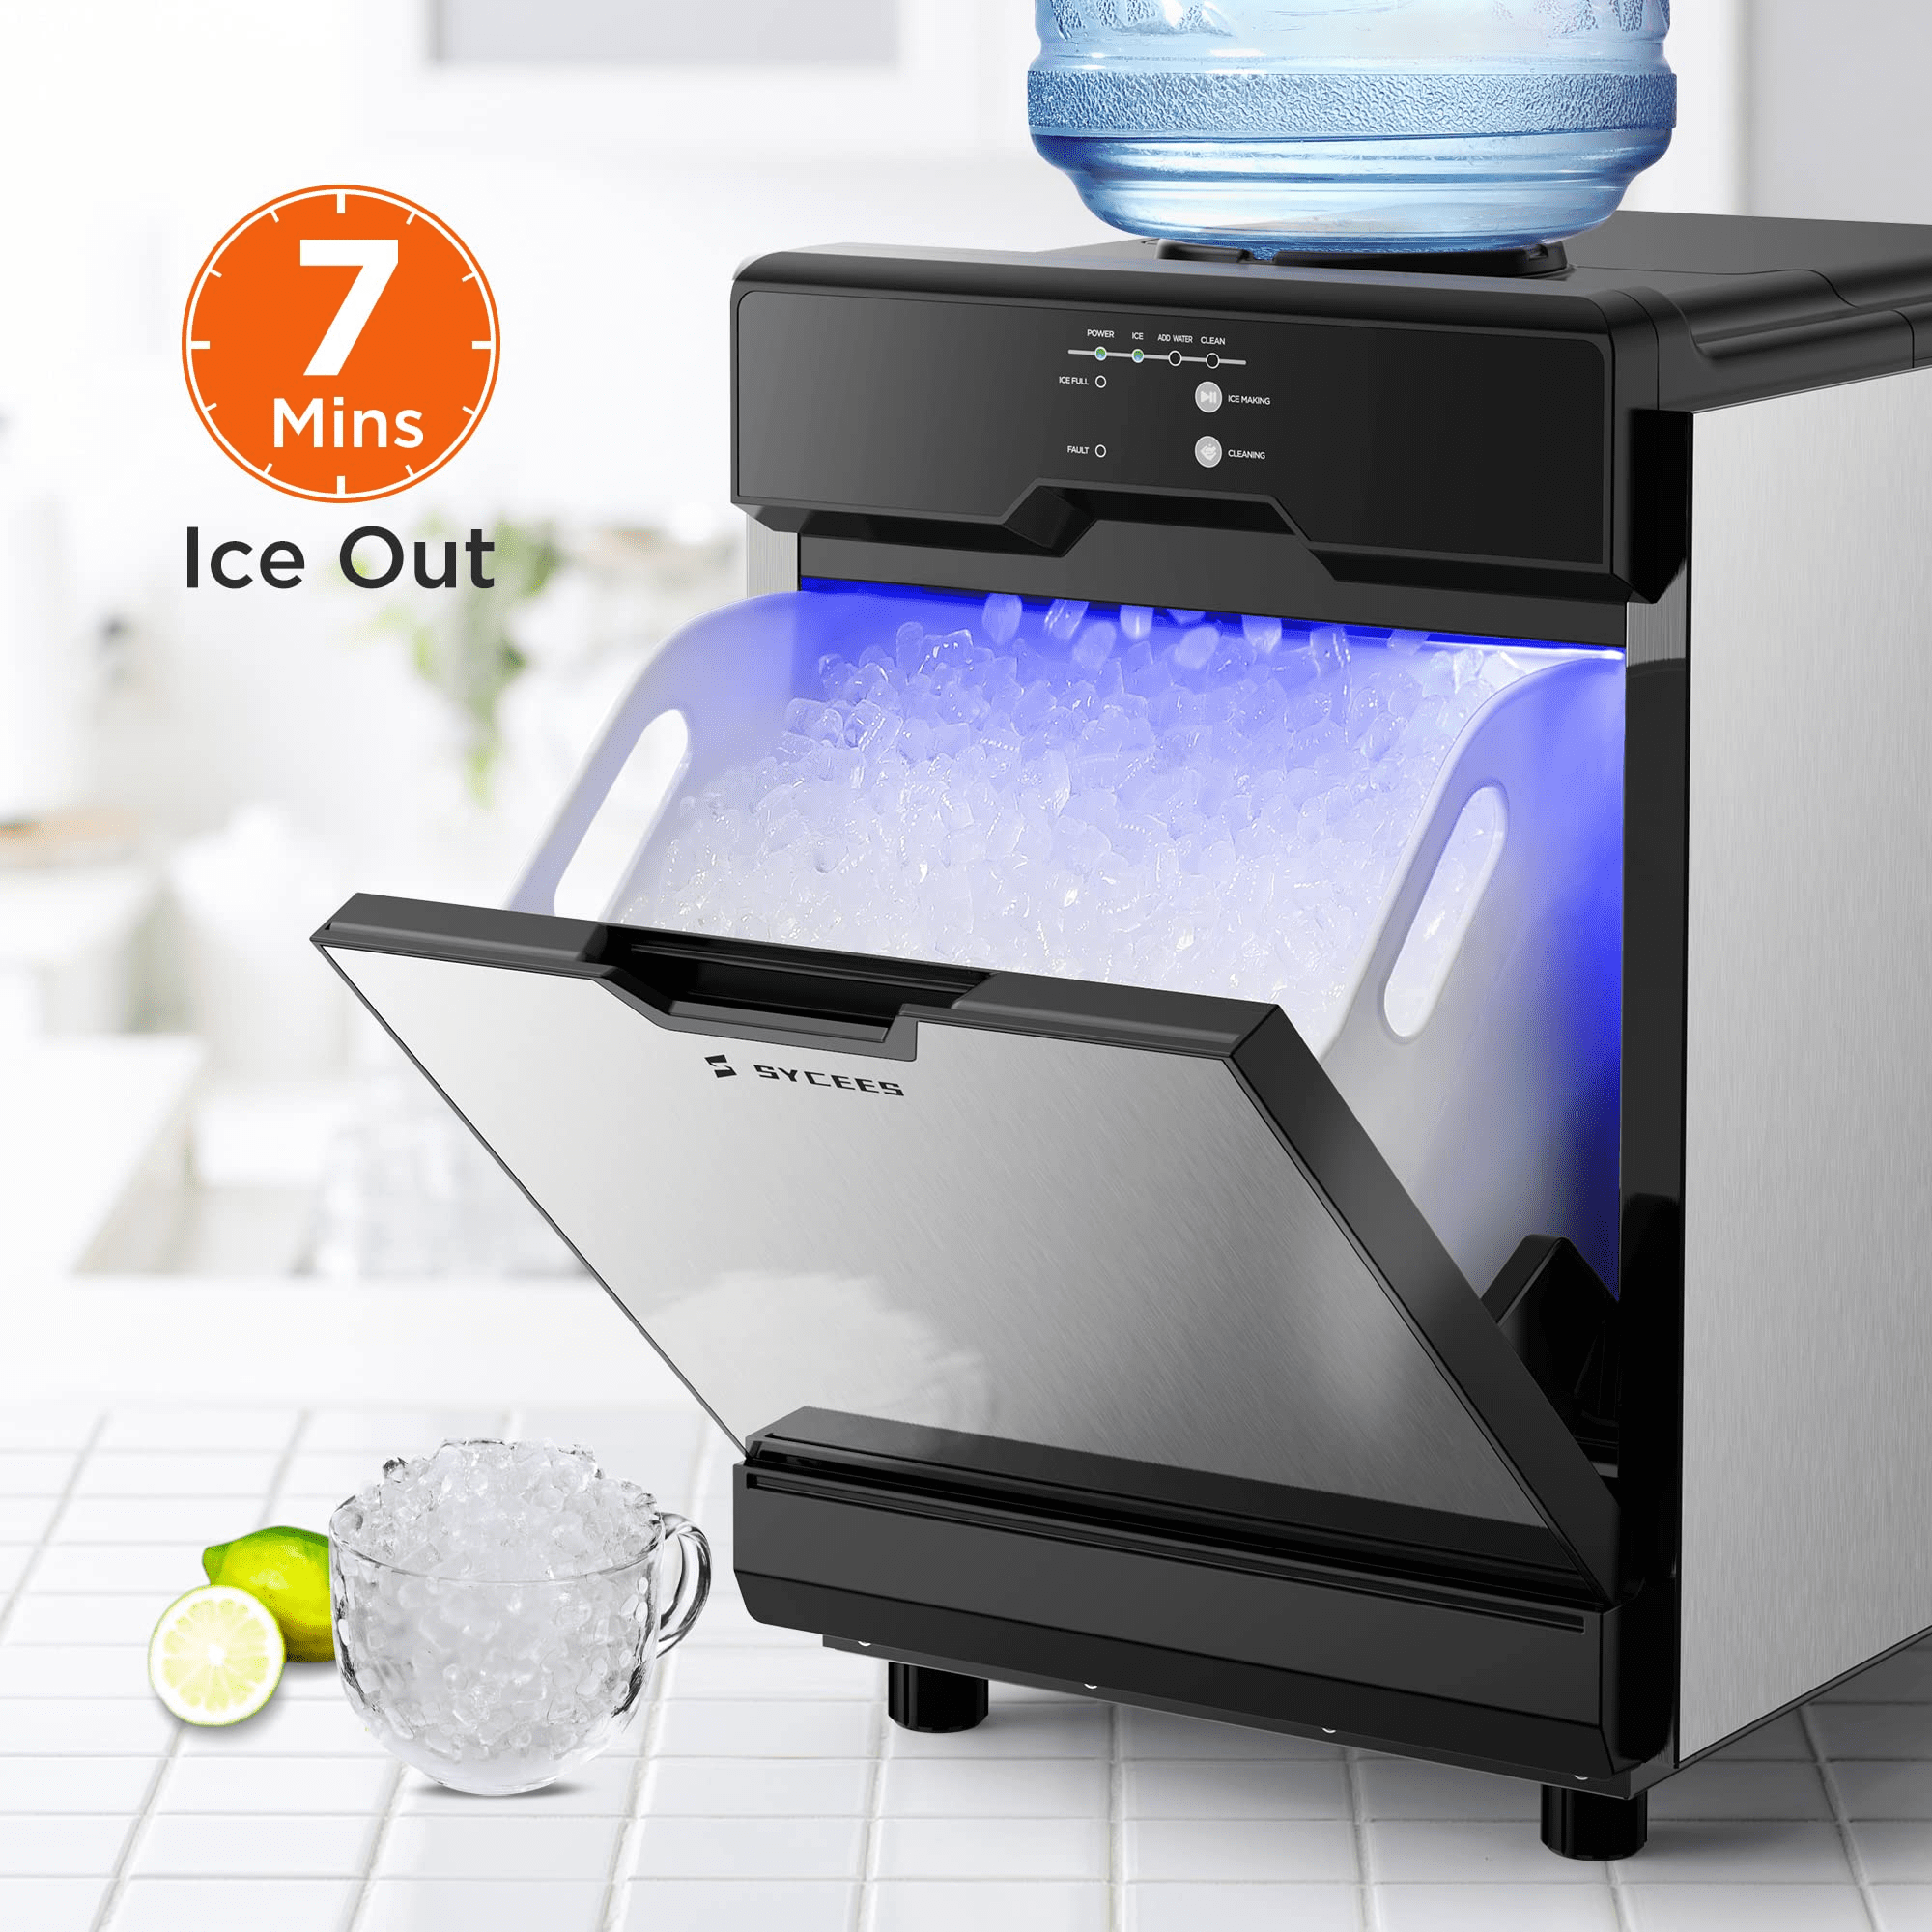 Make Sonic Ice At Home With This Ice Maker